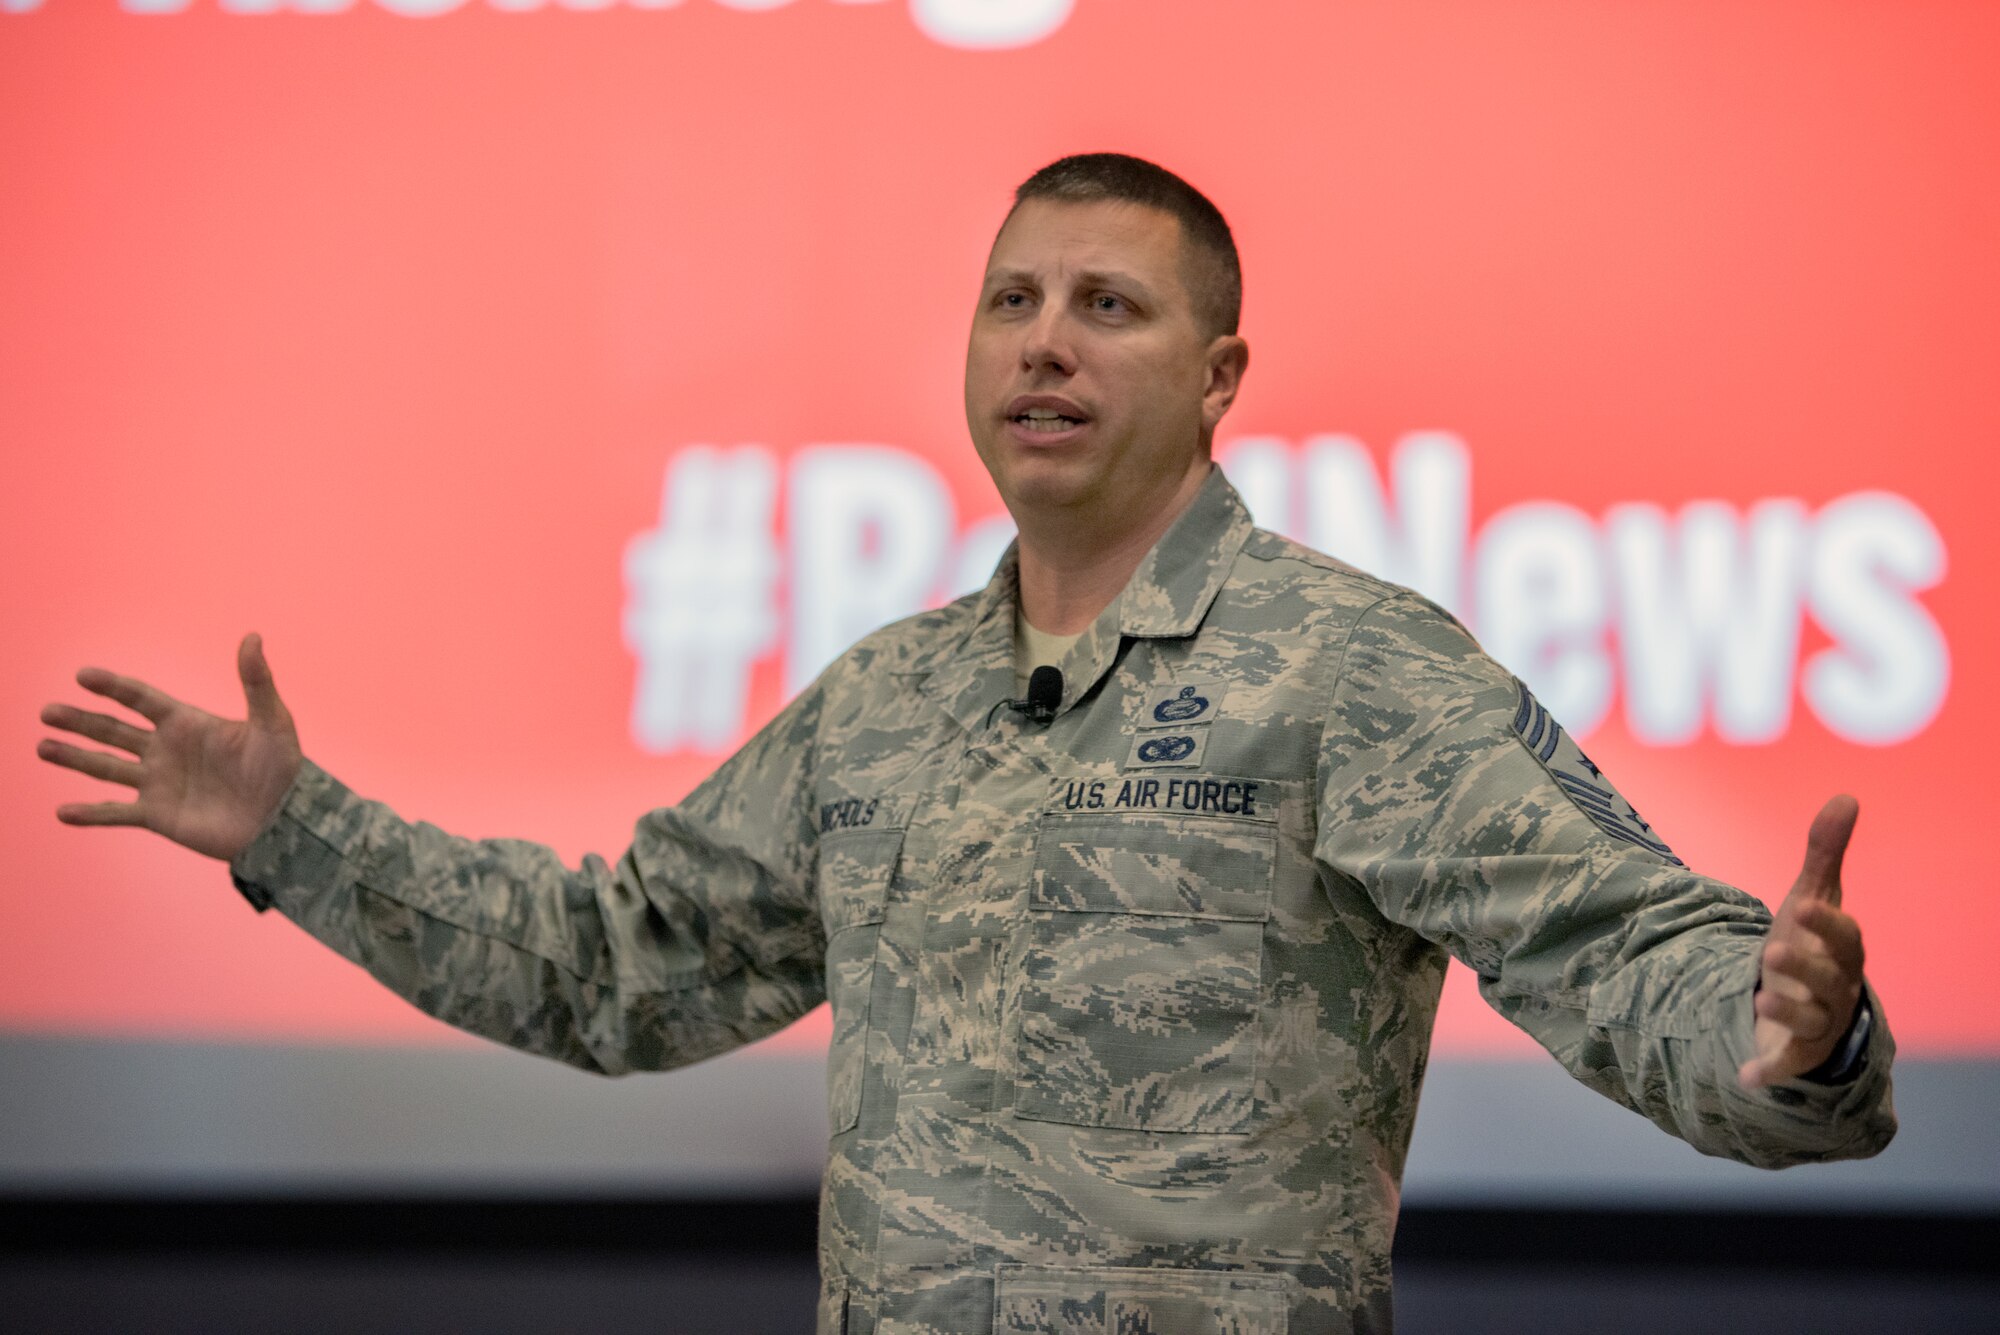 U.S. Air Force Chief Master Sgt. Steve Nichols, 60th Air Mobility Wing command chief, addresses members of the 60th AMW during a commander's call at Travis Air Force Base, Calif., May 8, 2018. Nichols is participating in his last commander’s calls as the command chief before retiring in September. (U.S. Air Force photo by Louis Briscese)